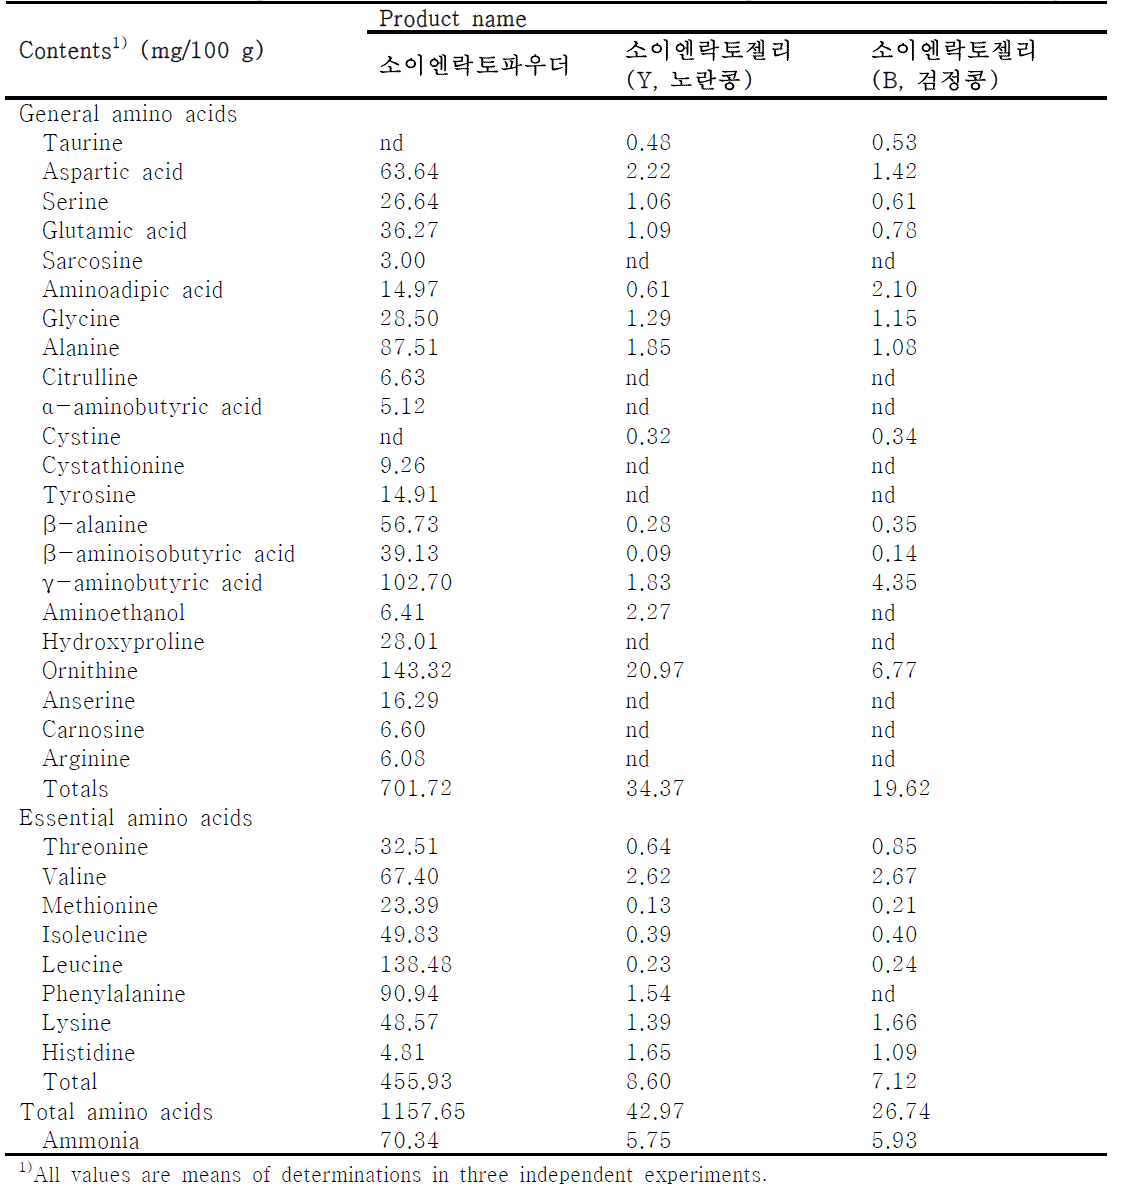 Comparison of free amino acid contents in the products based on soy-yogurt